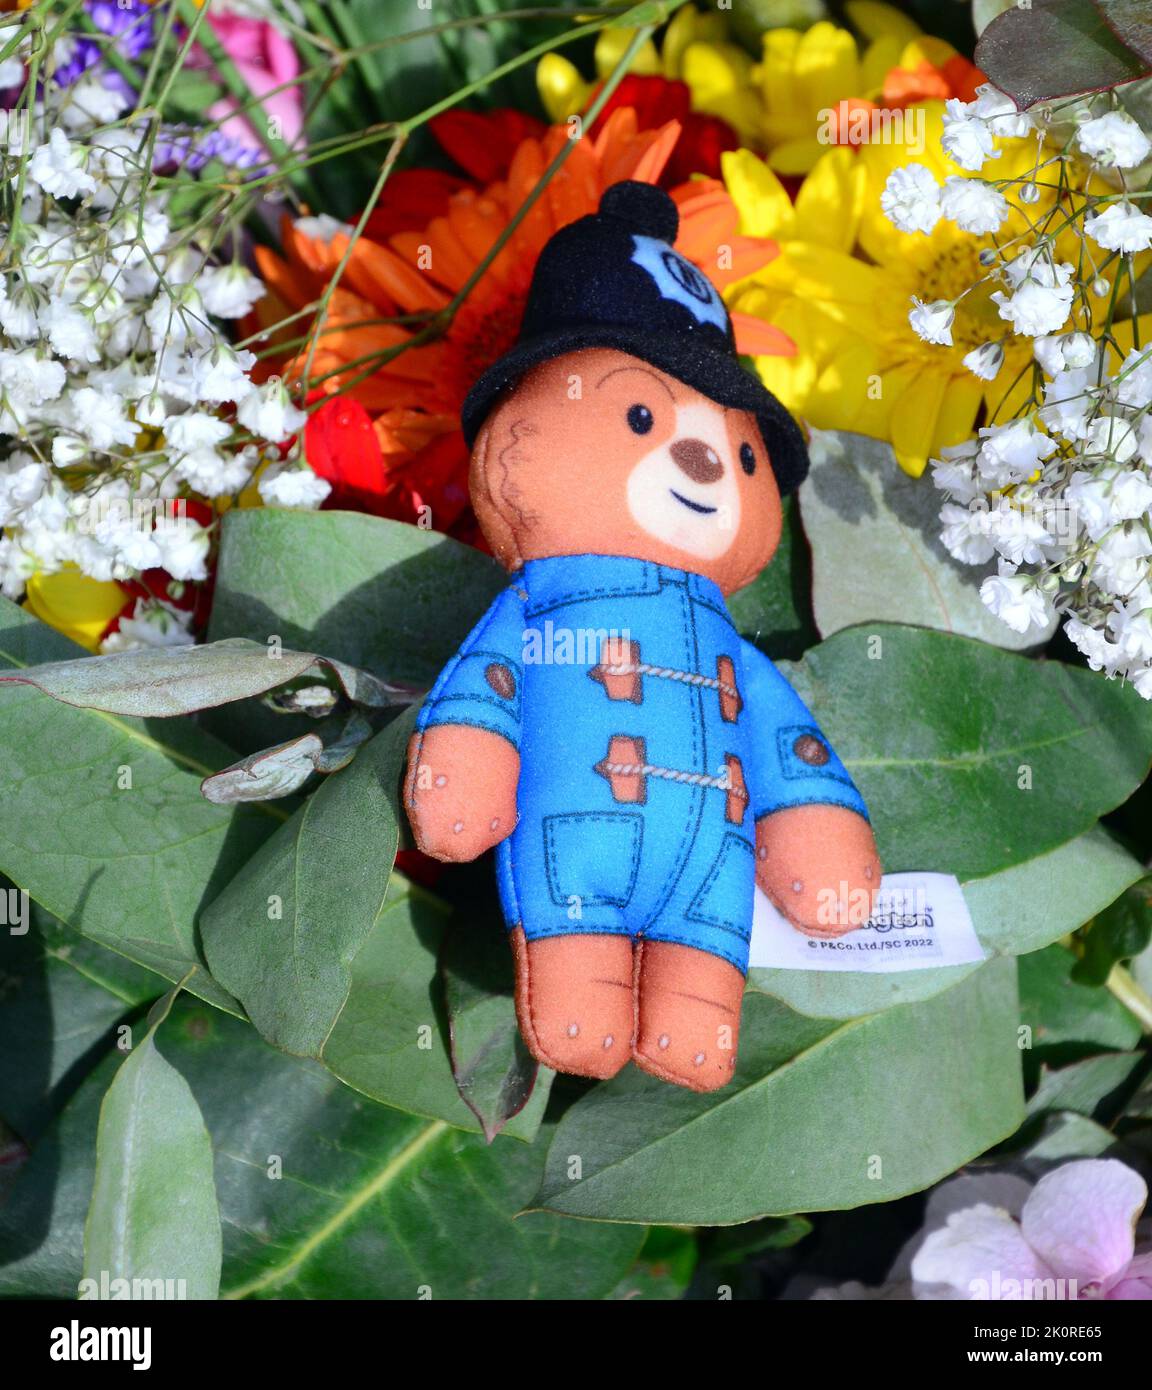 Manchester, UK, 13th September, 2022.  A Paddington Bear tribute left with flowers in St Ann's Square, Manchester, United Kingdom, as a tribute to Her Majesty, Queen Elizabeth II. The Queen died, aged 96, on 8th September, 2022. Manchester City Council has said on its website that the city of Manchester will be observing the official 10-day mourning period and that: 'Residents may wish to lay flowers to mark Her Majesty’s death. You can lay flowers at St Ann's Square'. Credit: Terry Waller/Alamy Live News Stock Photo